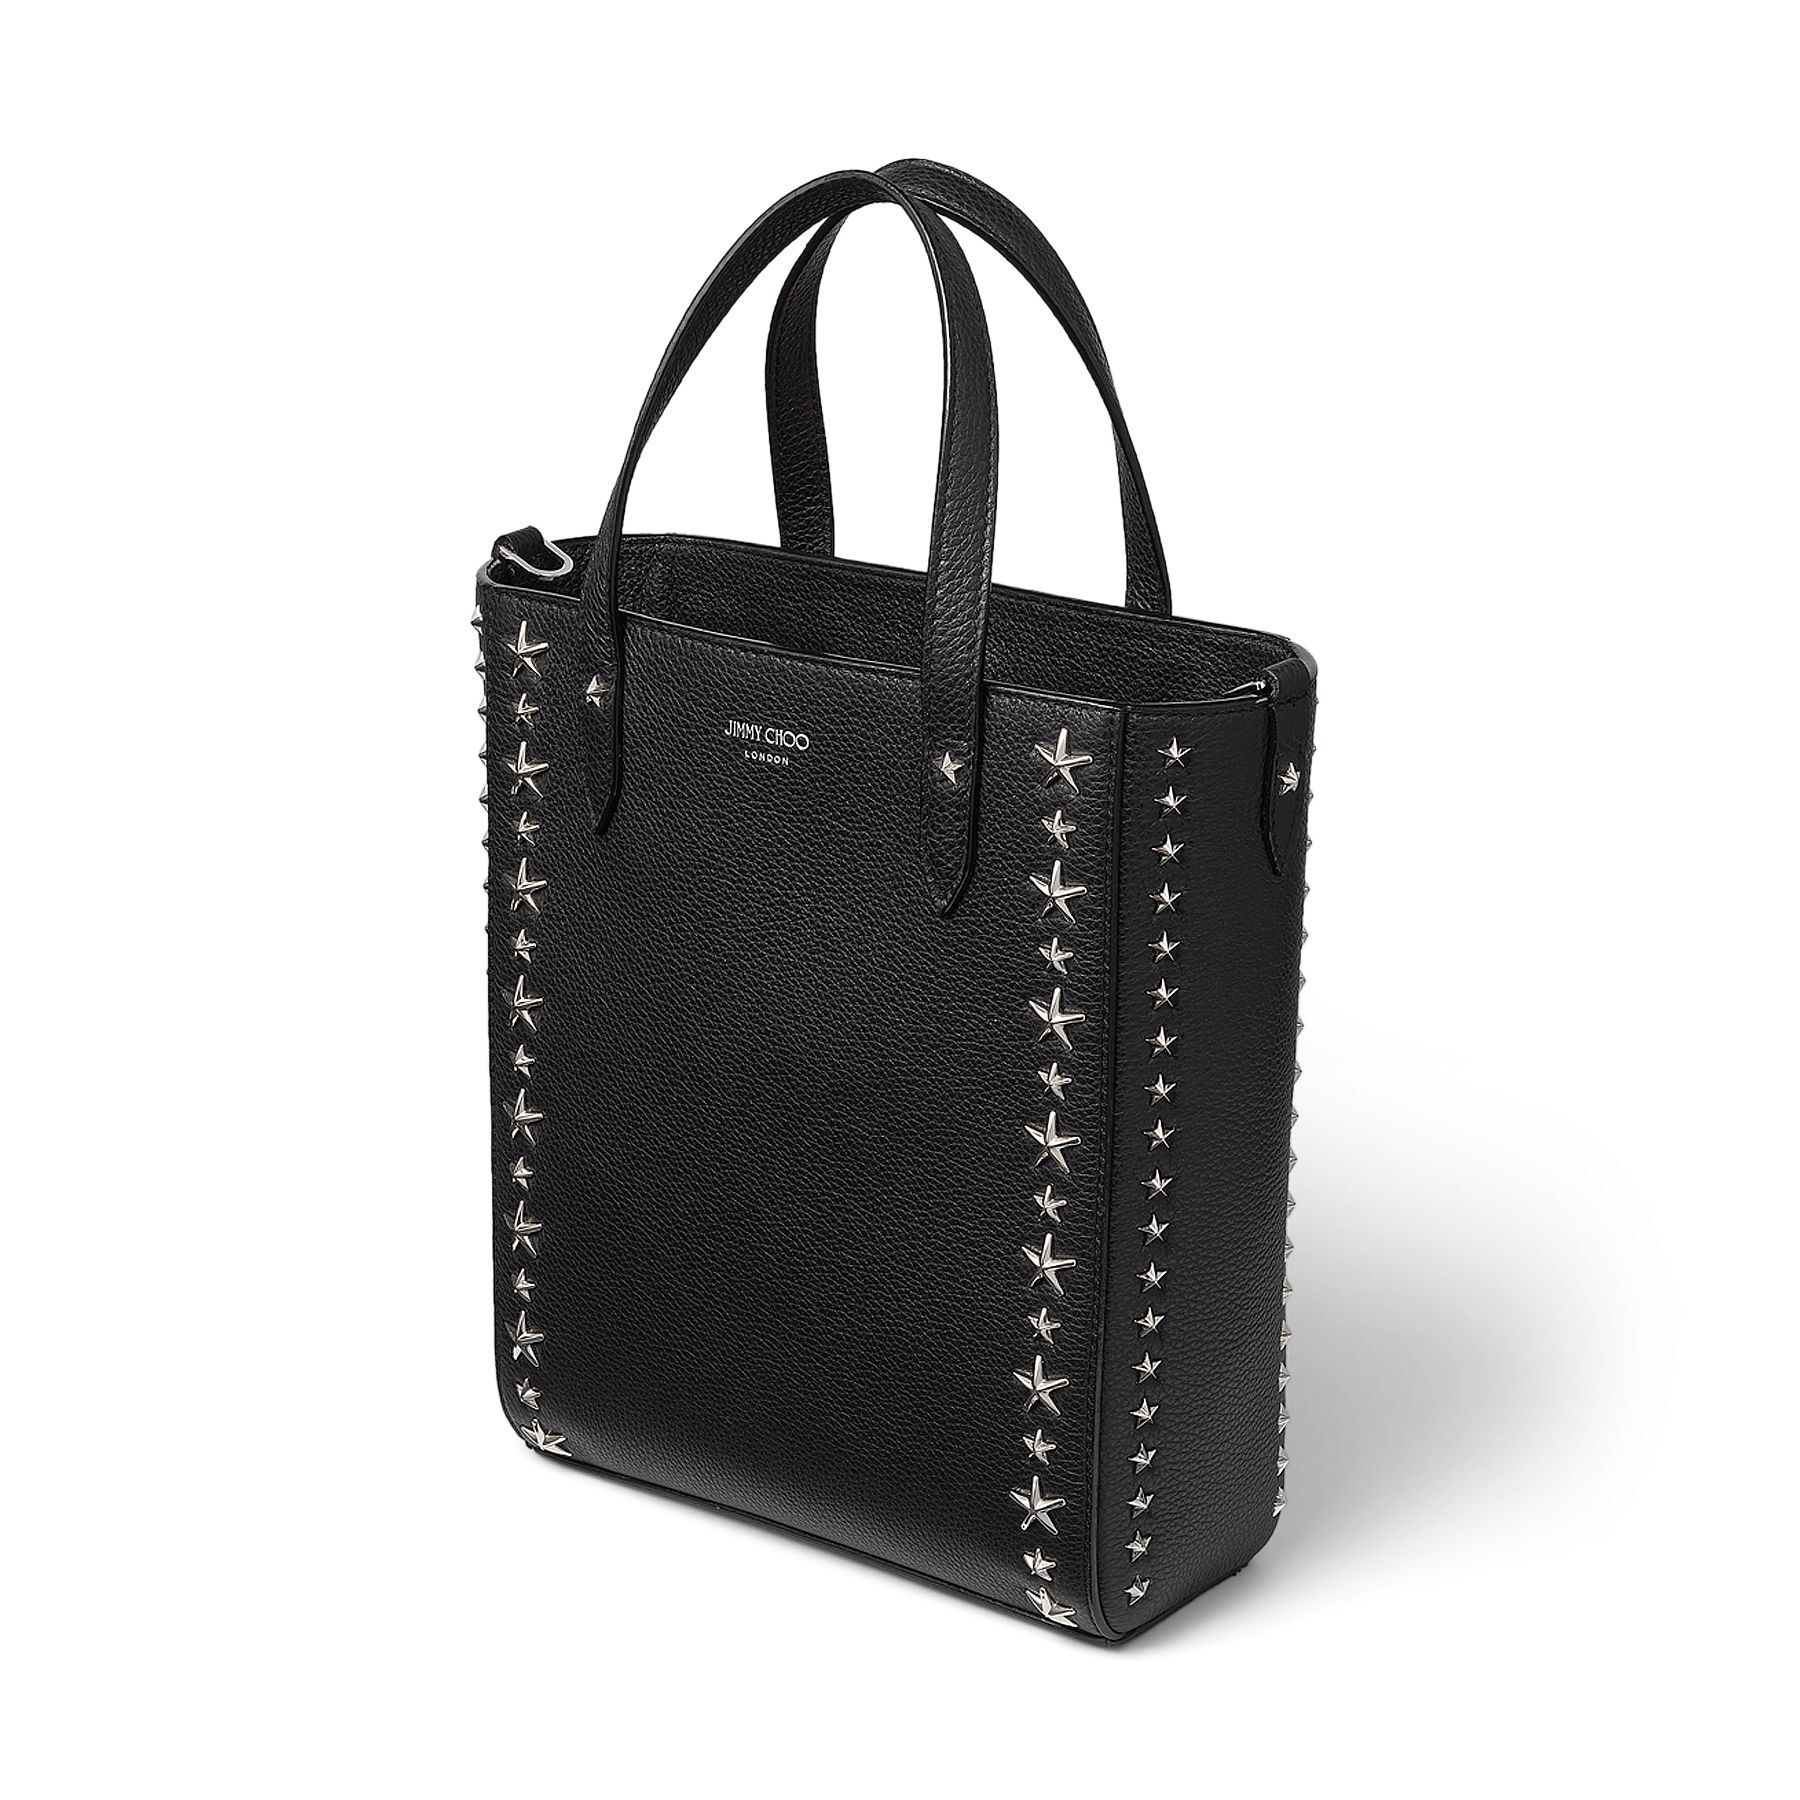 Black Soft Grainy Calf Leather Tote Bag with Stars | PEGASI N/S 